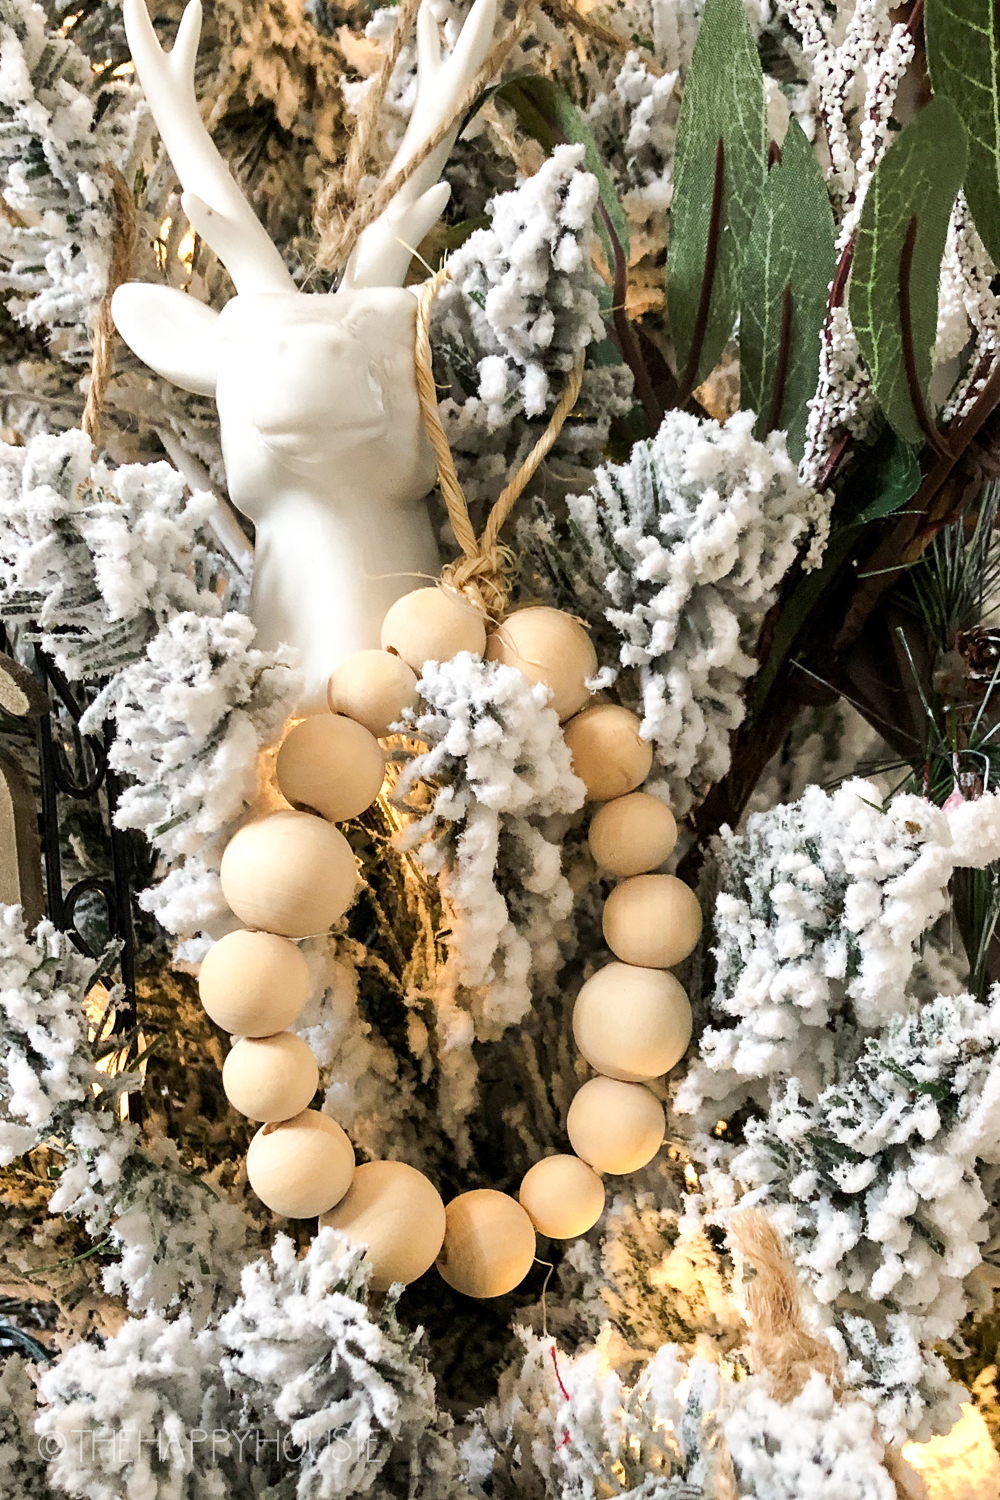 A flocked Christmas tree with a deer ornament and wooden beads.